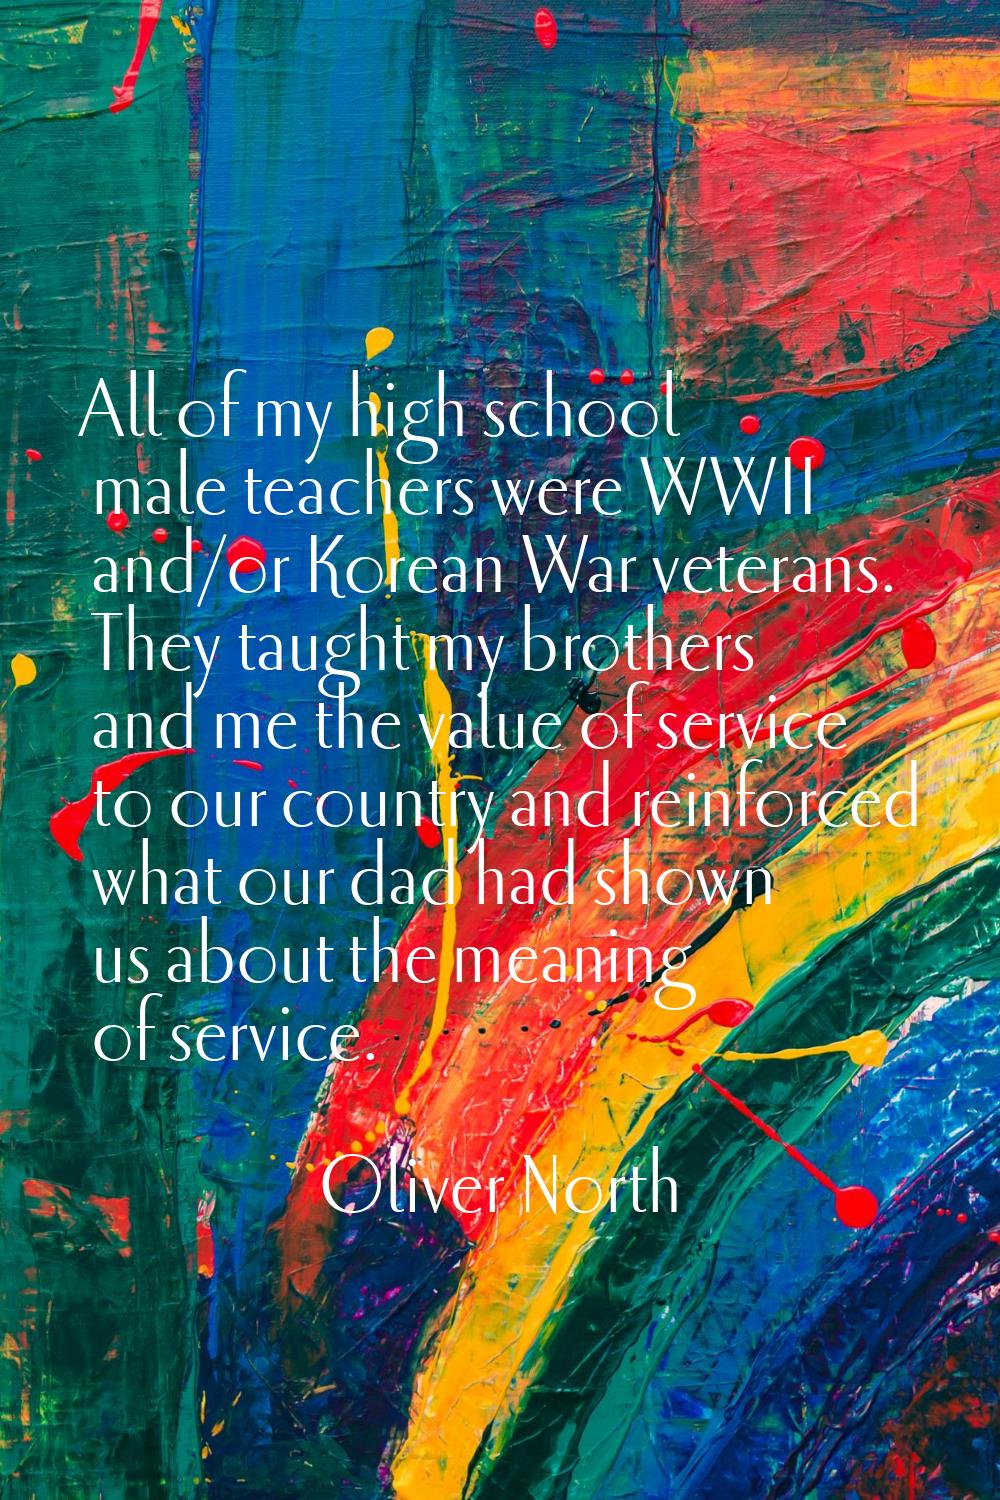 All of my high school male teachers were WWII and/or Korean War veterans. They taught my brothers a